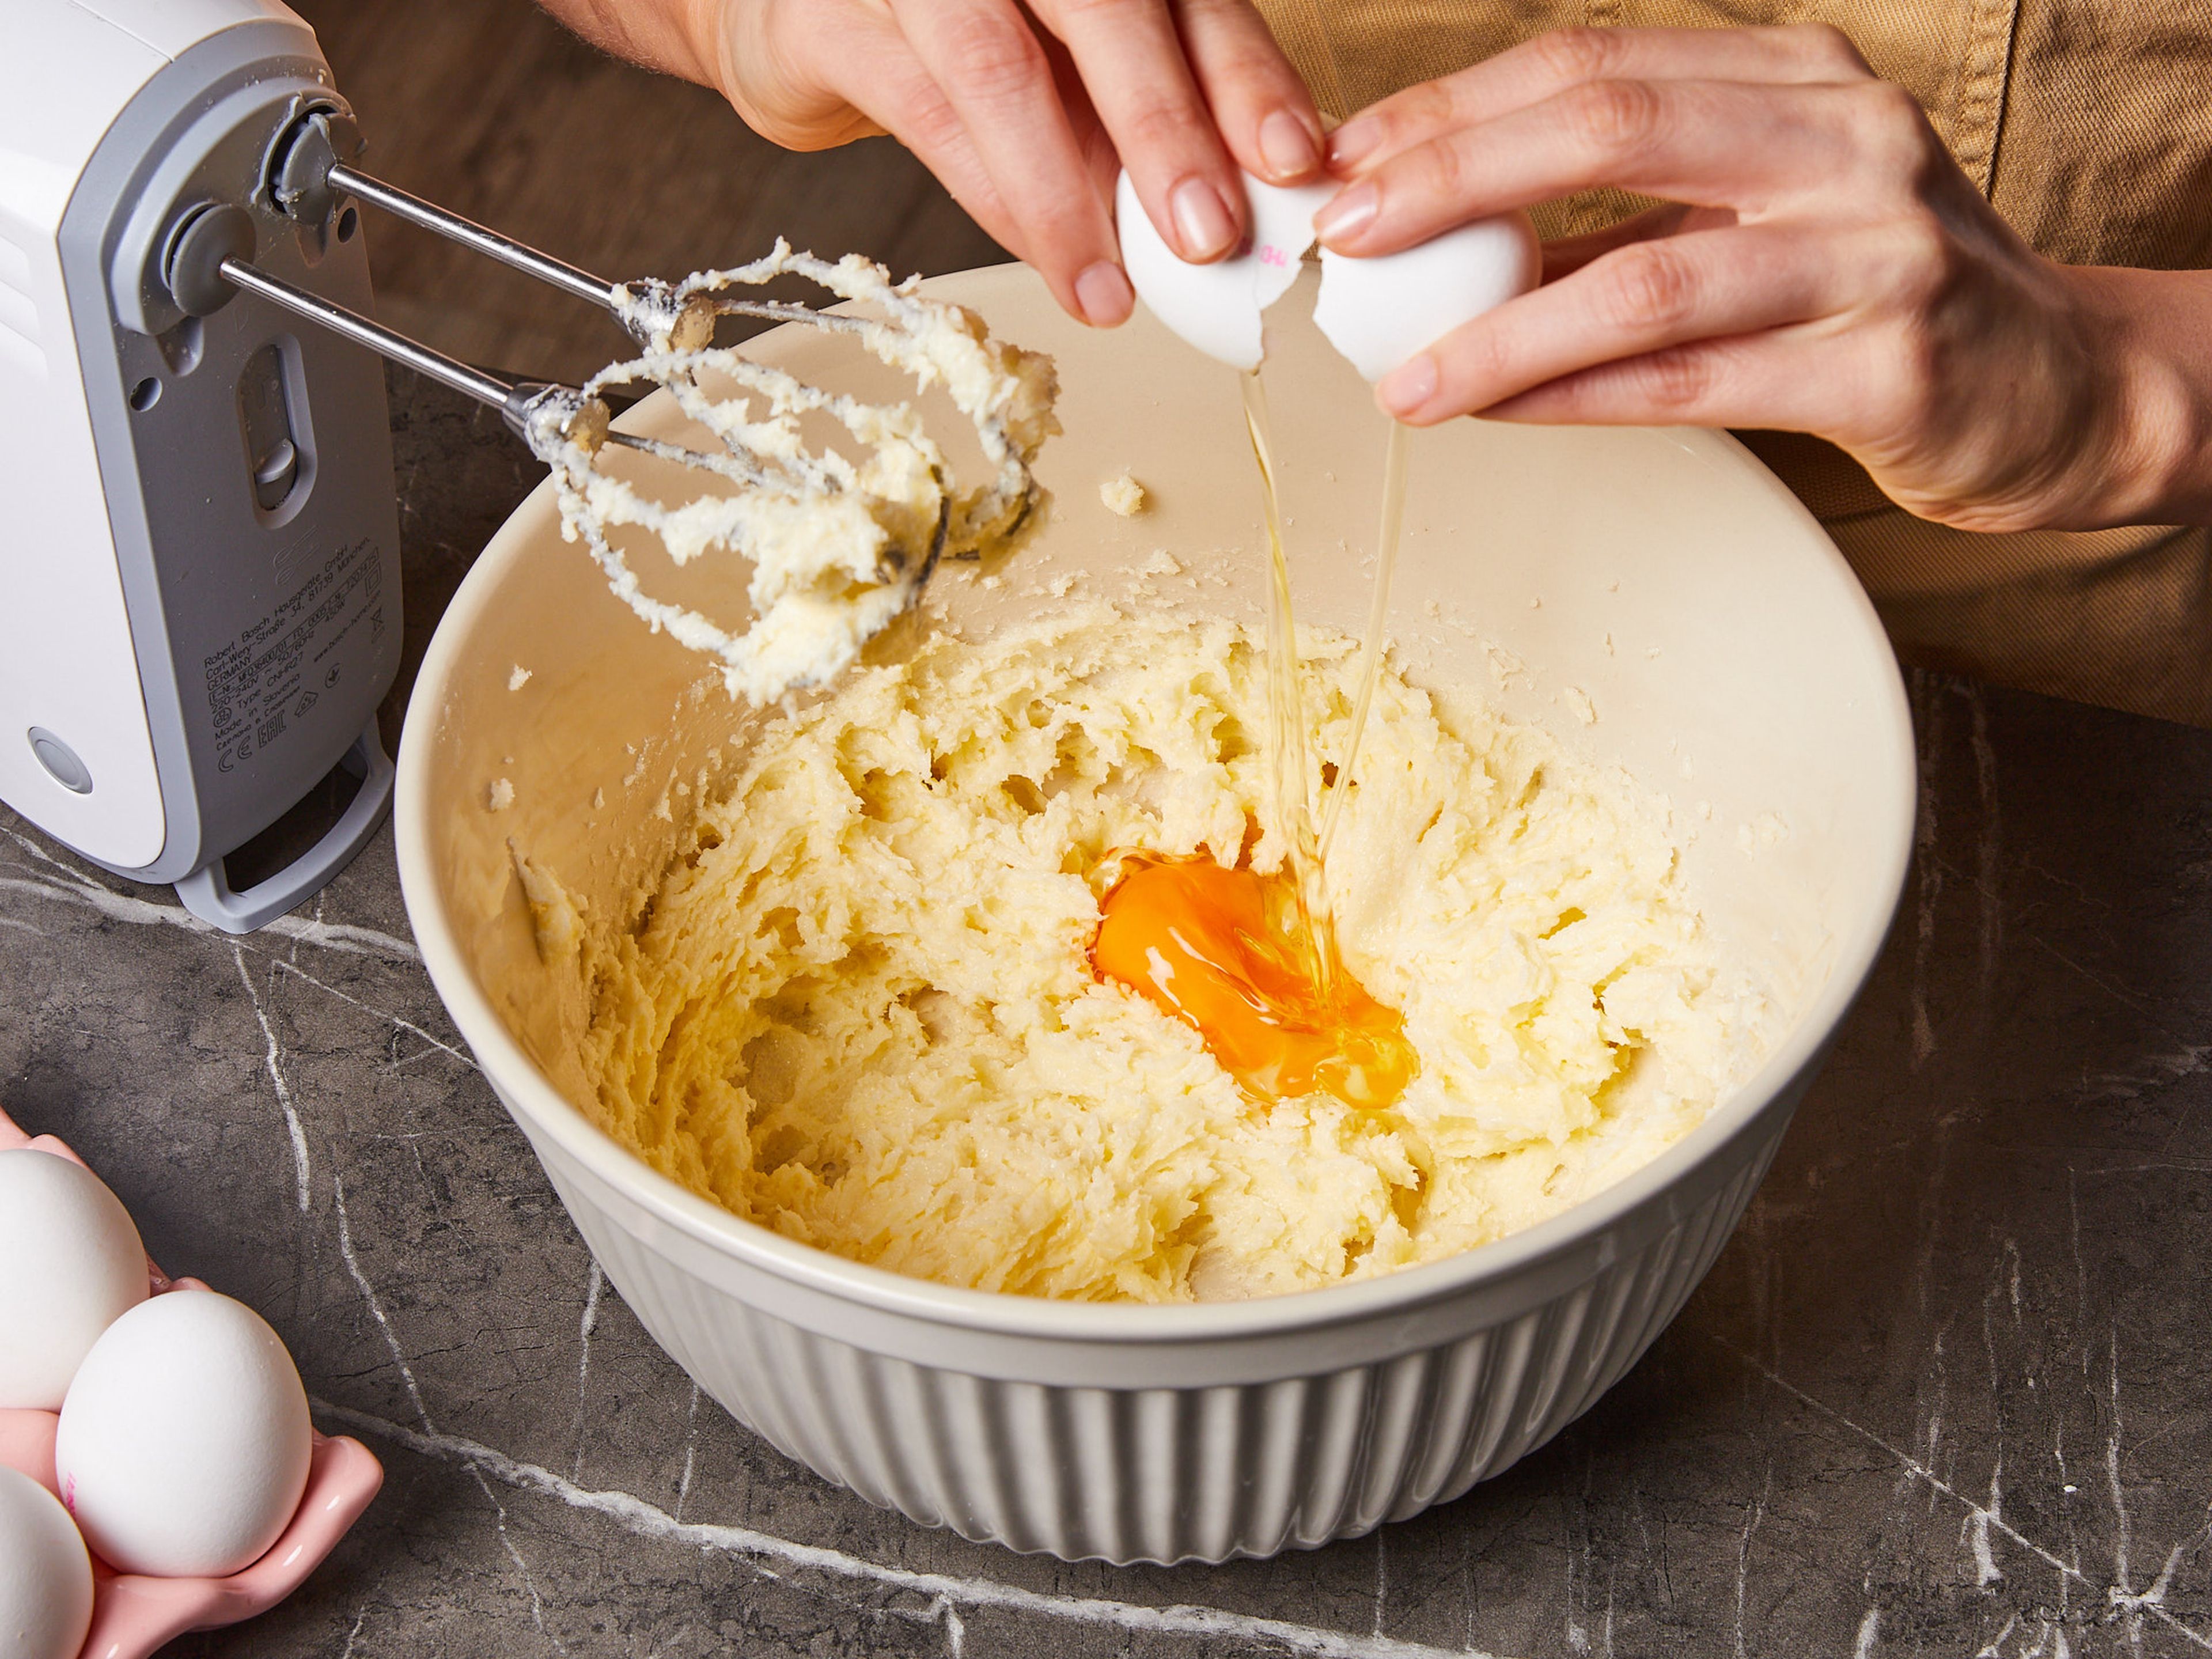 For this fluffy cake, preheat the oven to 180°C/350°F. In a bowl, beat butter, sugar, and vanilla extract with a hand mixer with beaters until creamy. Add eggs one by one and mix until everything is smooth. Finely grate lemon zest and stir it into the mix.